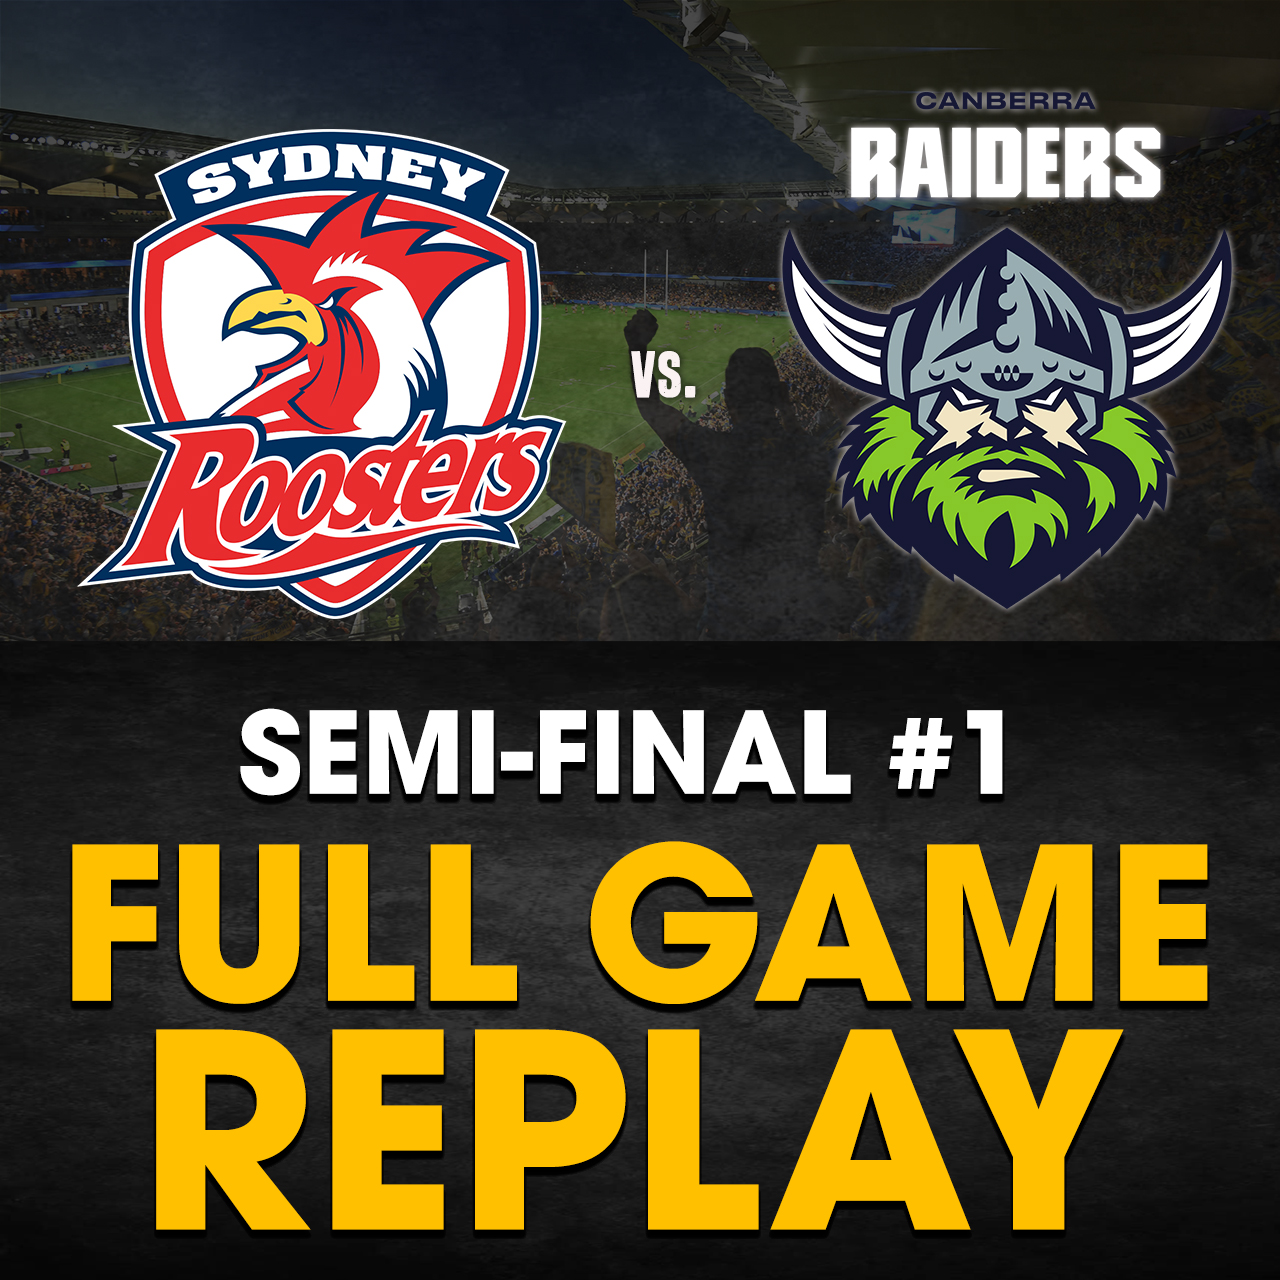 FULL GAME REPLAY | Sydney Roosters vs. Canberra Raiders: Semi Final